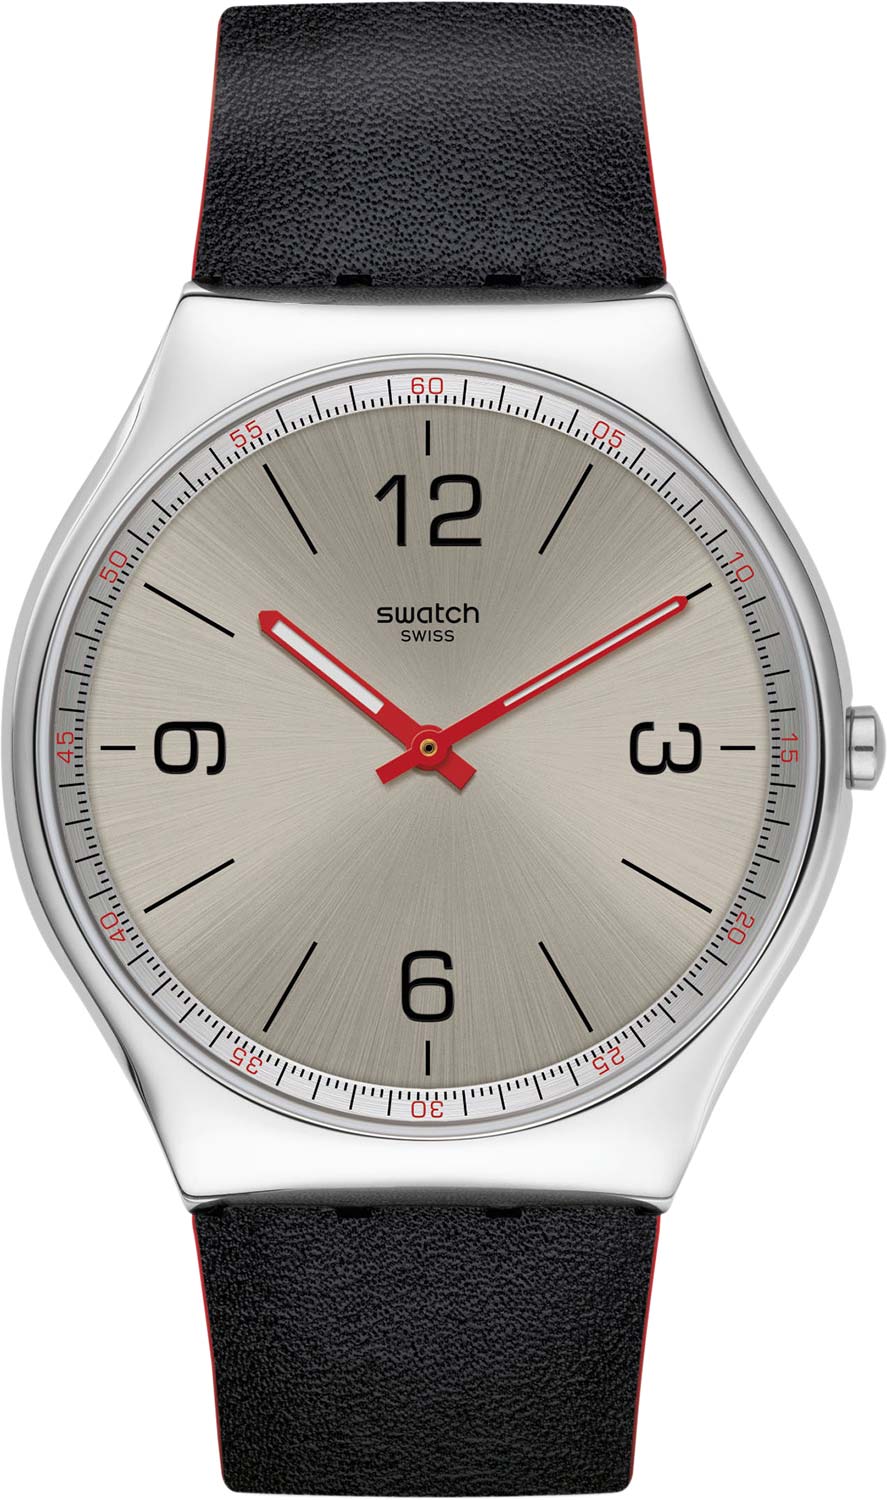    Swatch SS07S104